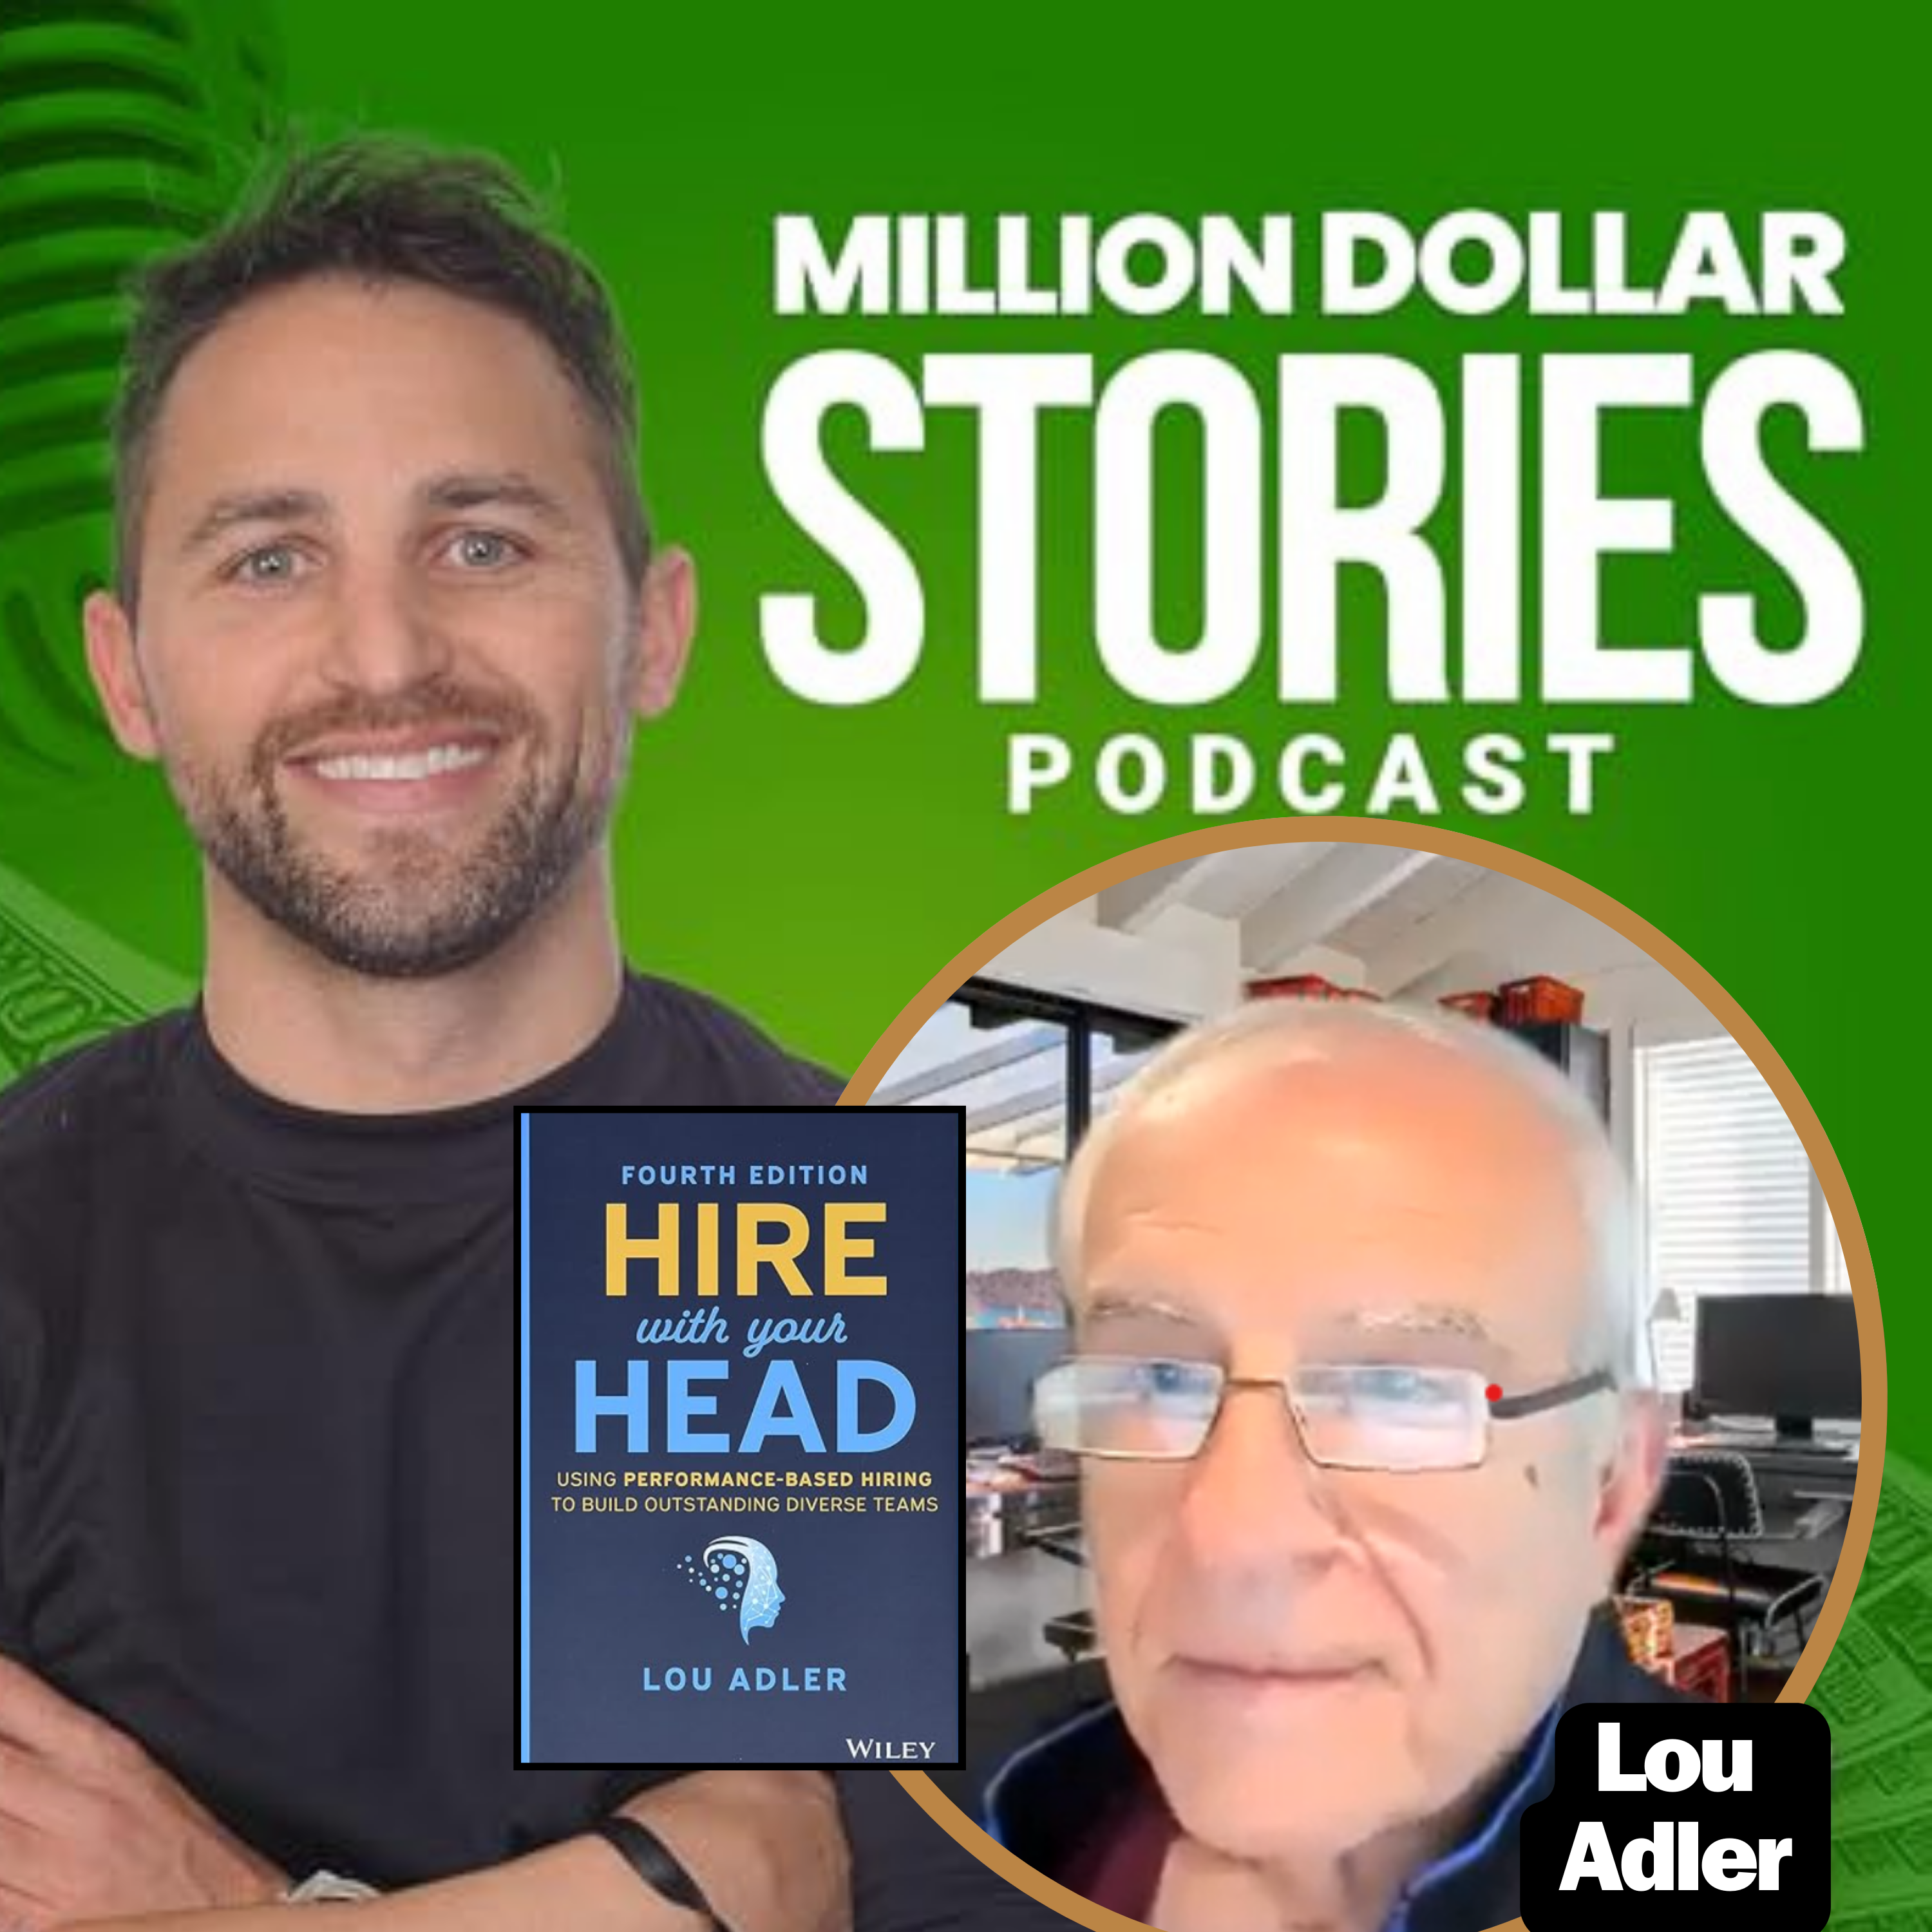 Lou Adler -Author of “Hire with Your Head”